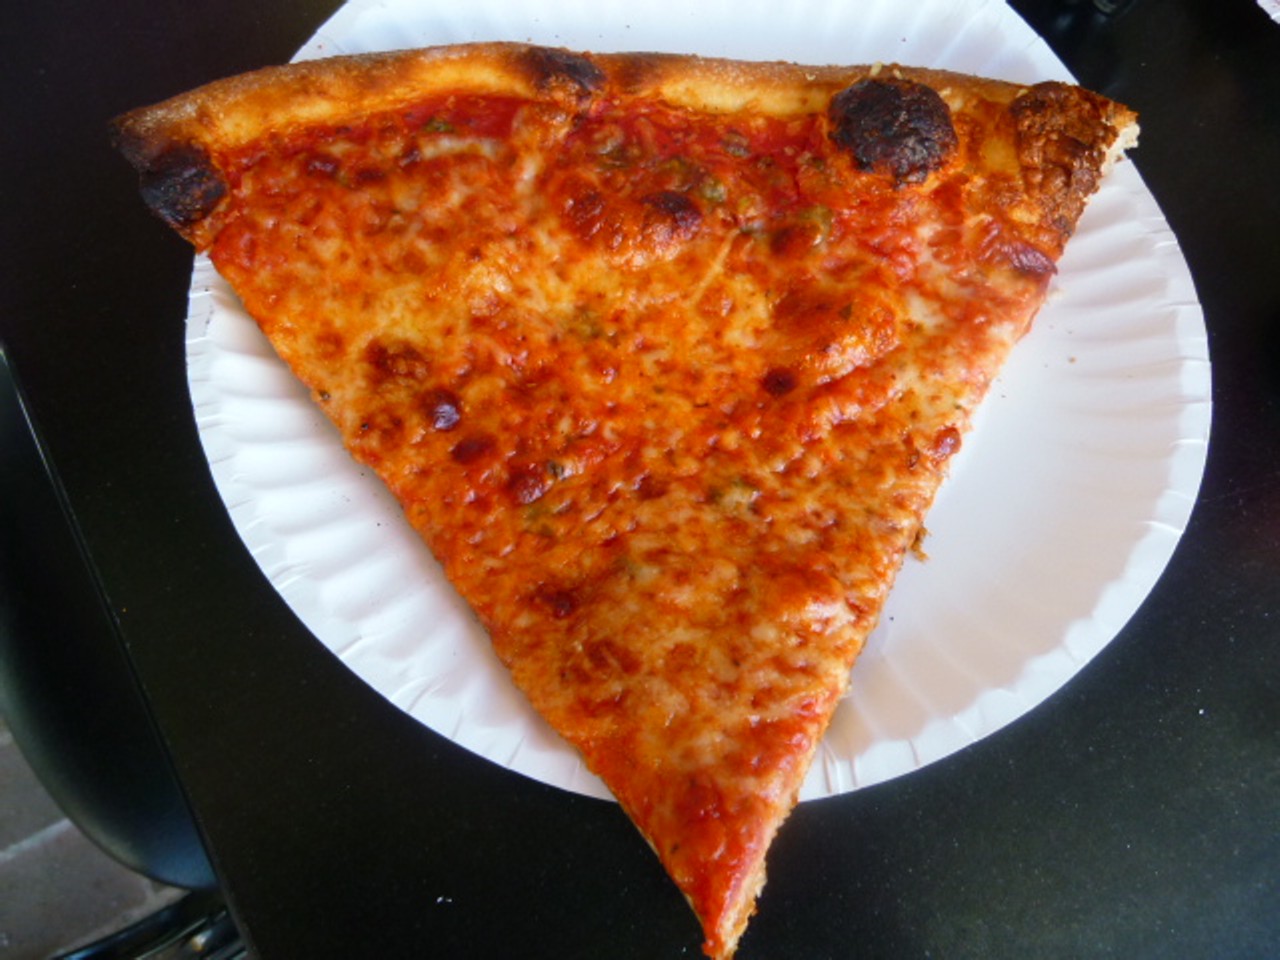 A Kings County slice in North Miami Beach: $2.25. Read more: Kings County Pizza Sells Da Real Brooklyn Slice.